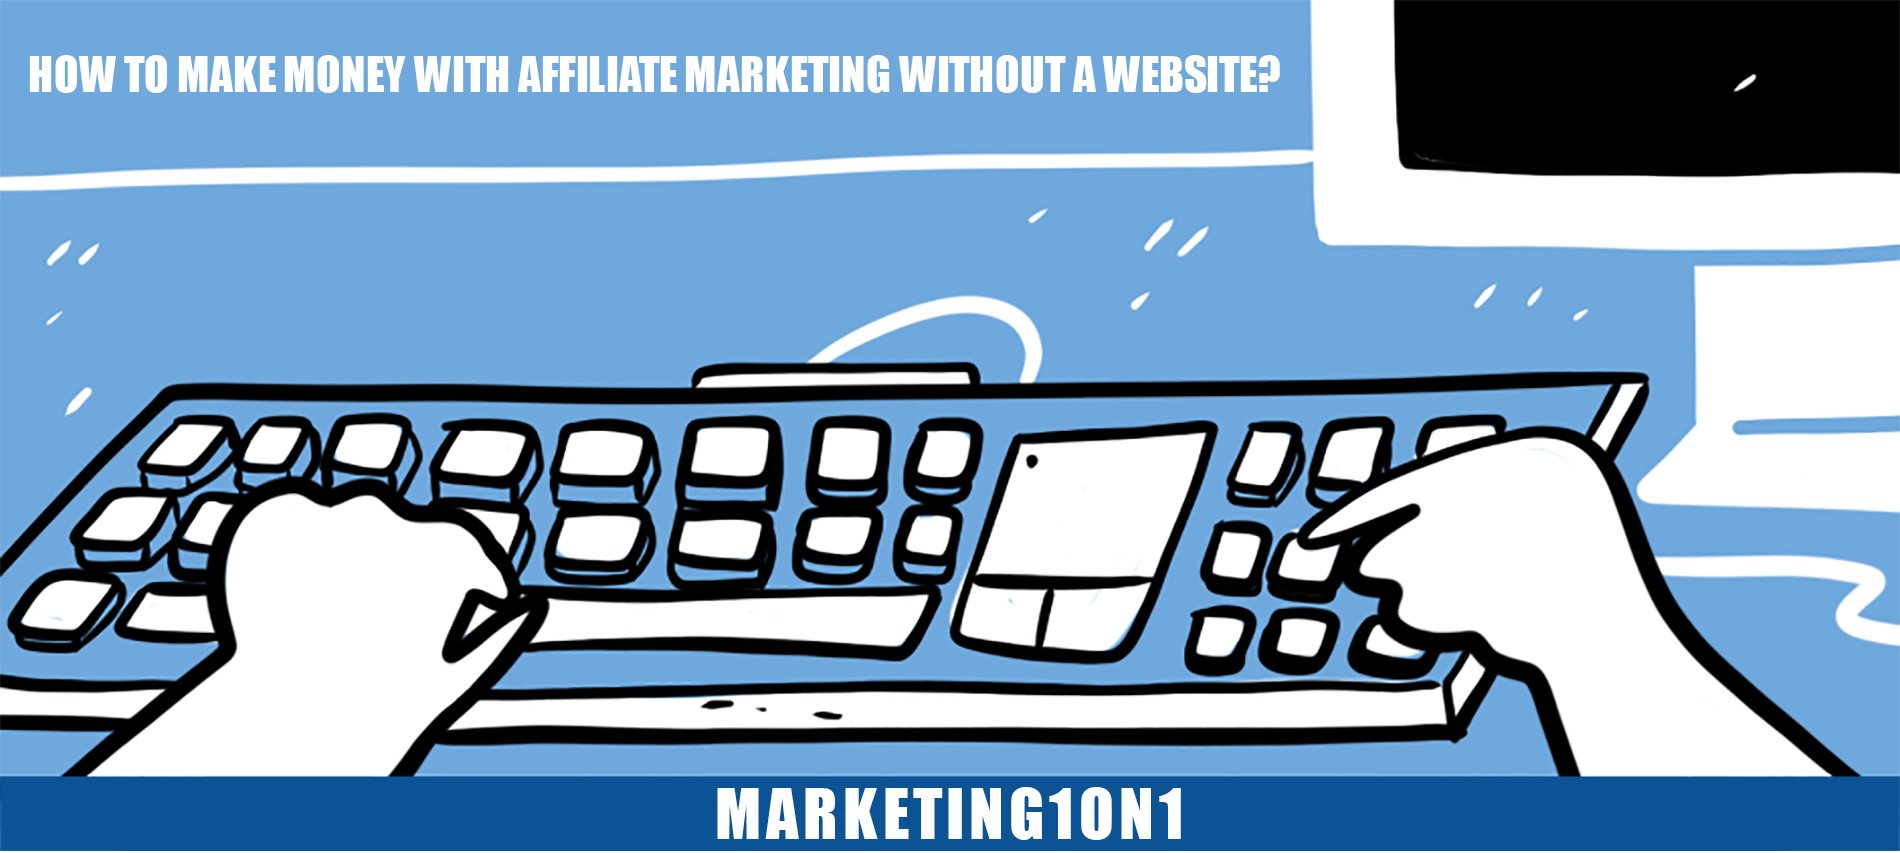 How to make money with affiliate marketing without a website?